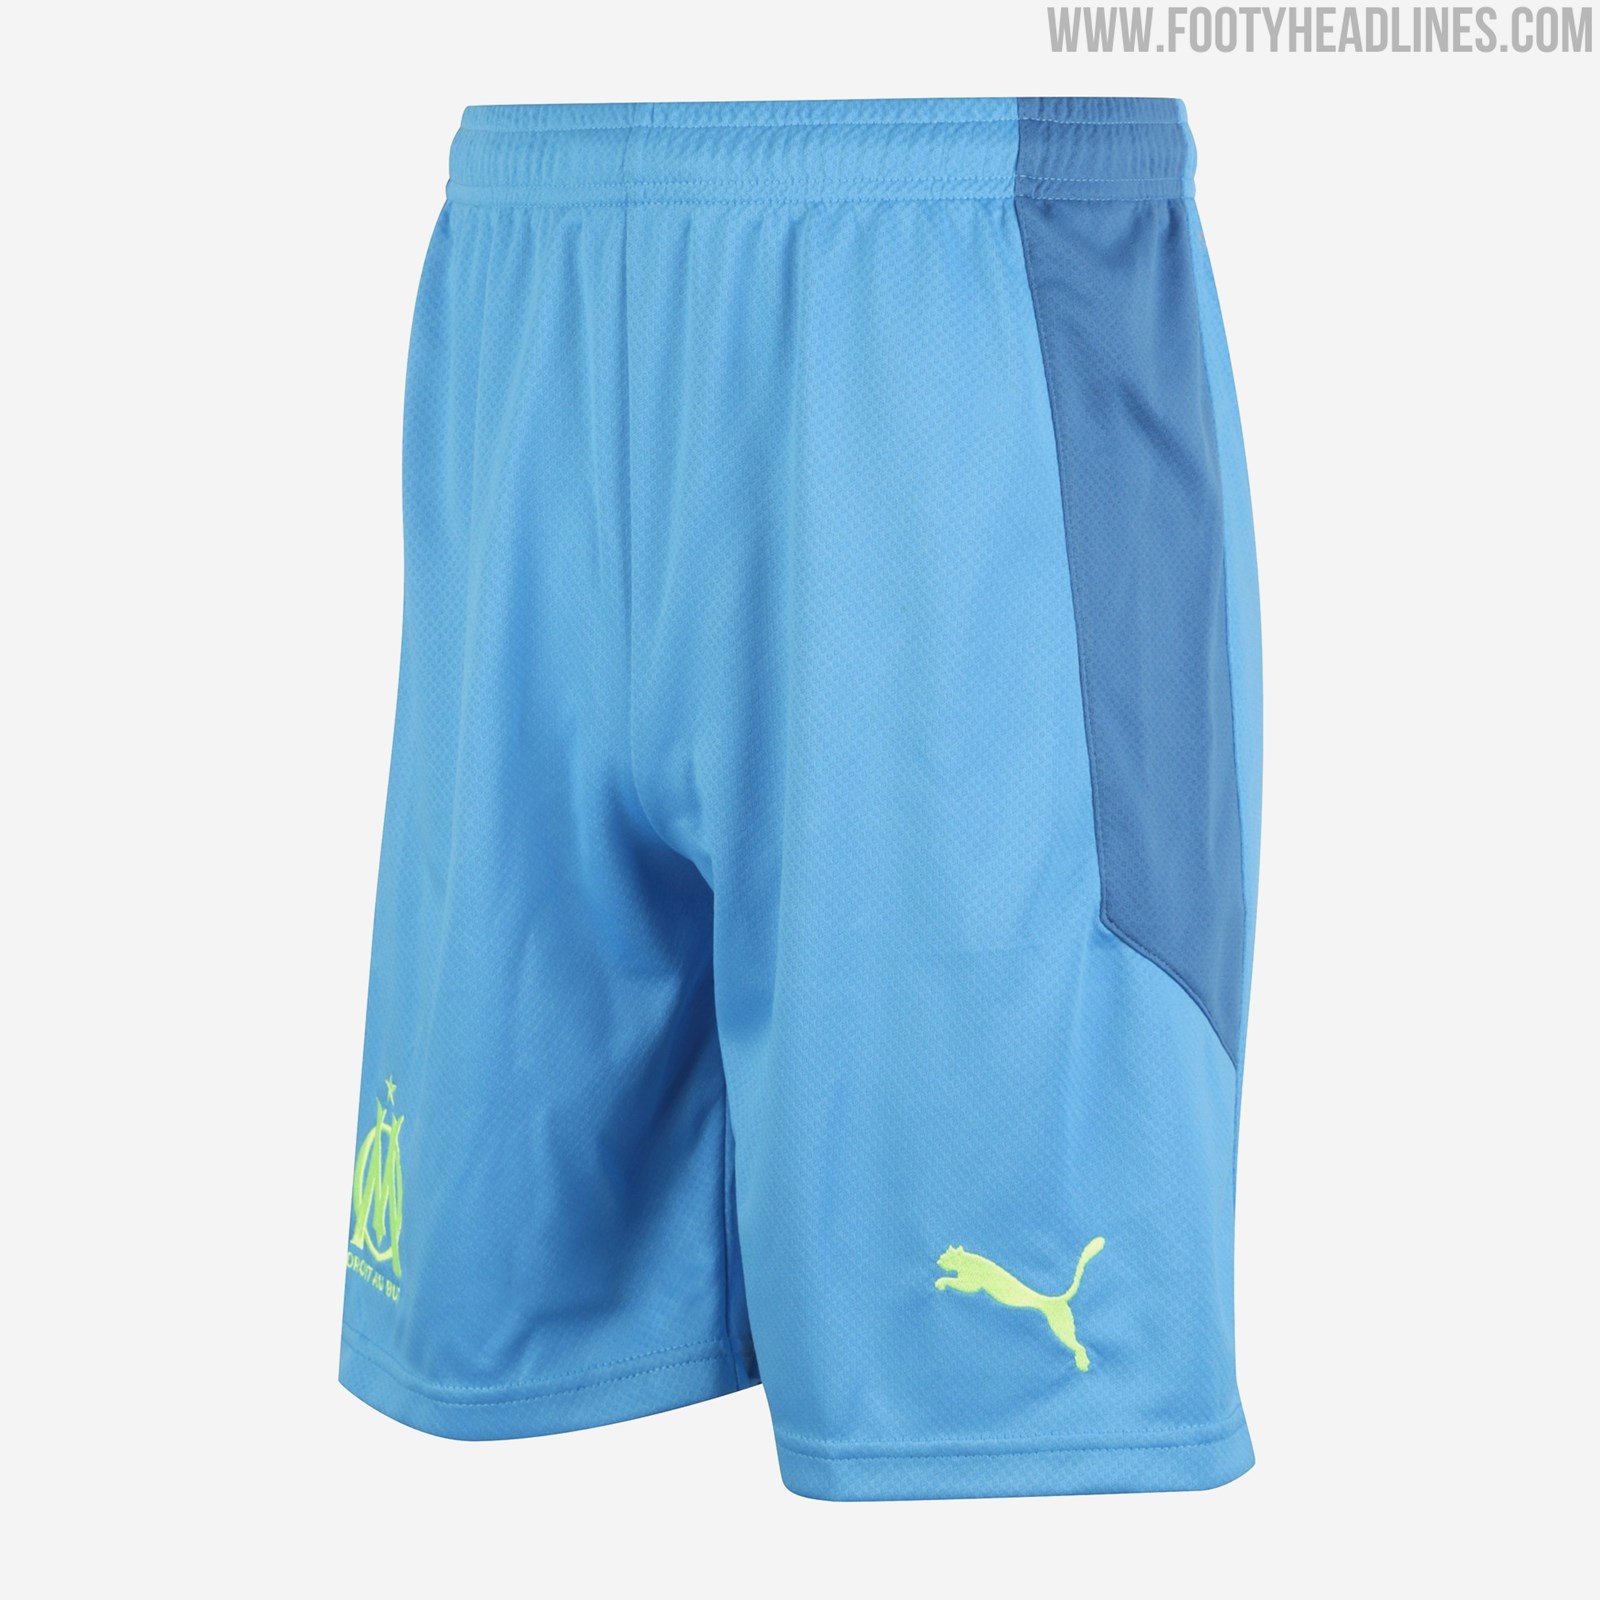 Olympique Marseille 20-21 Third Kit Released - Footy Headlines